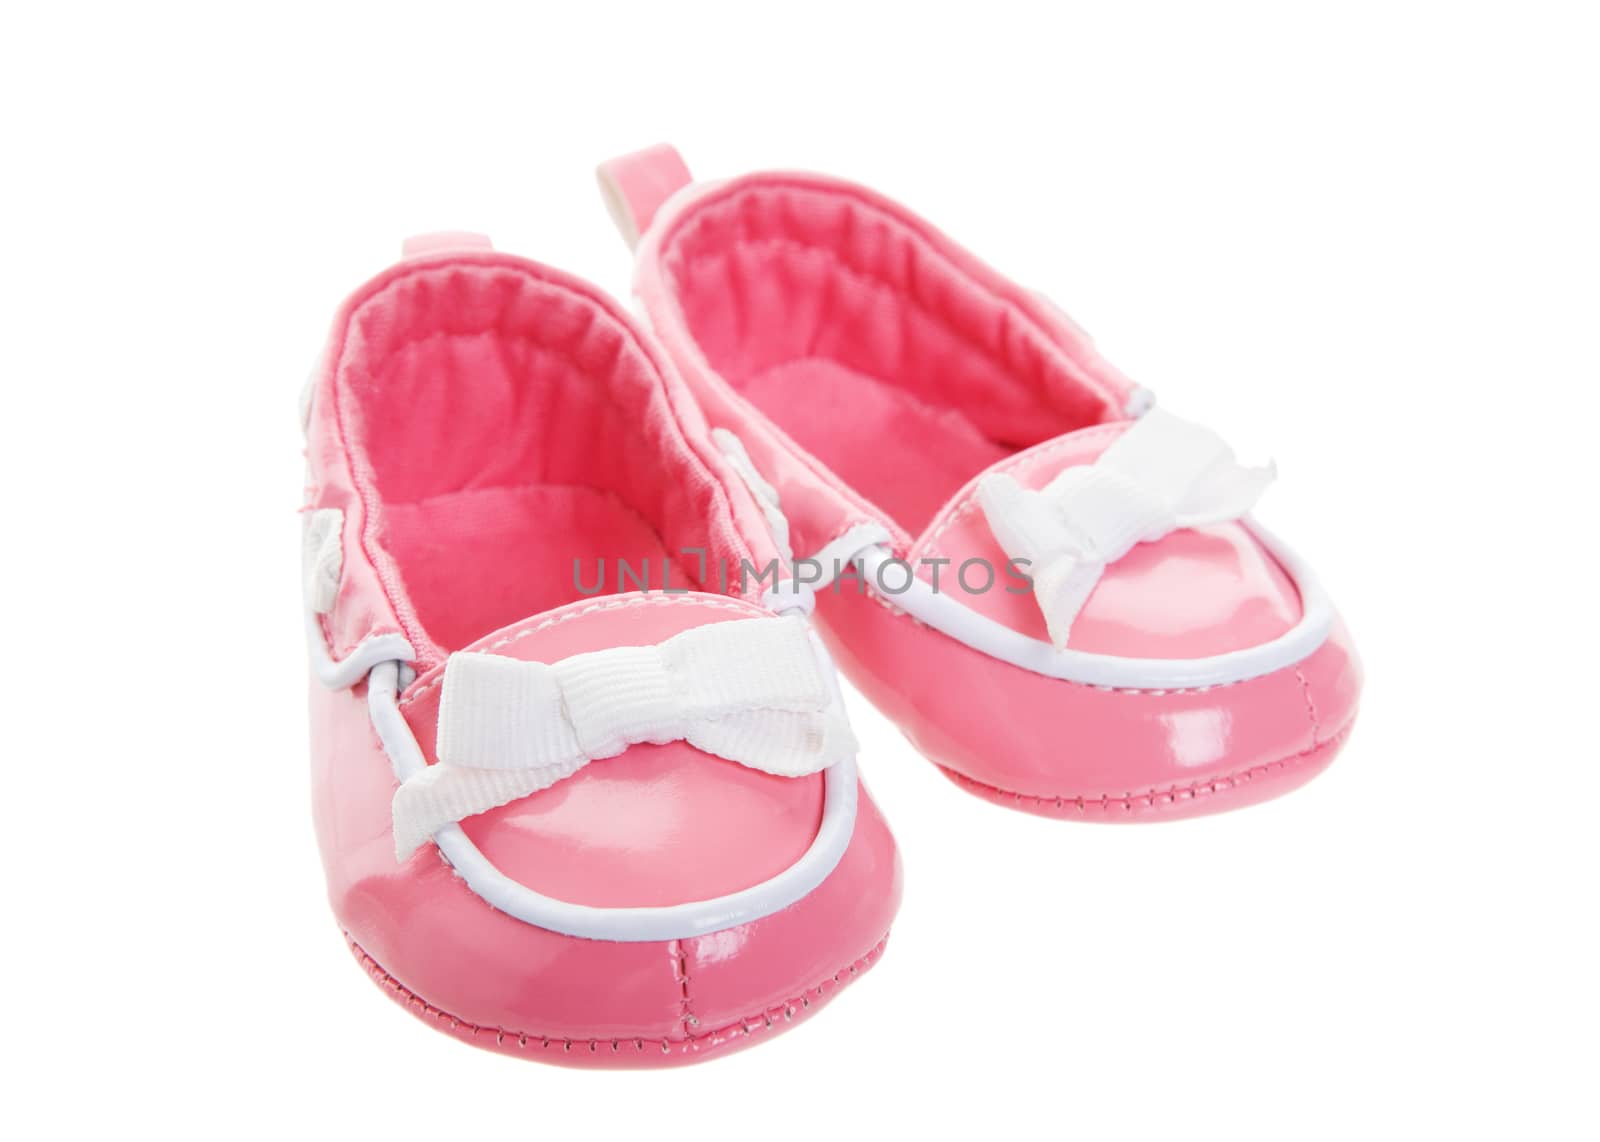 A pink pair of worn baby shoes.  Shot on white background.